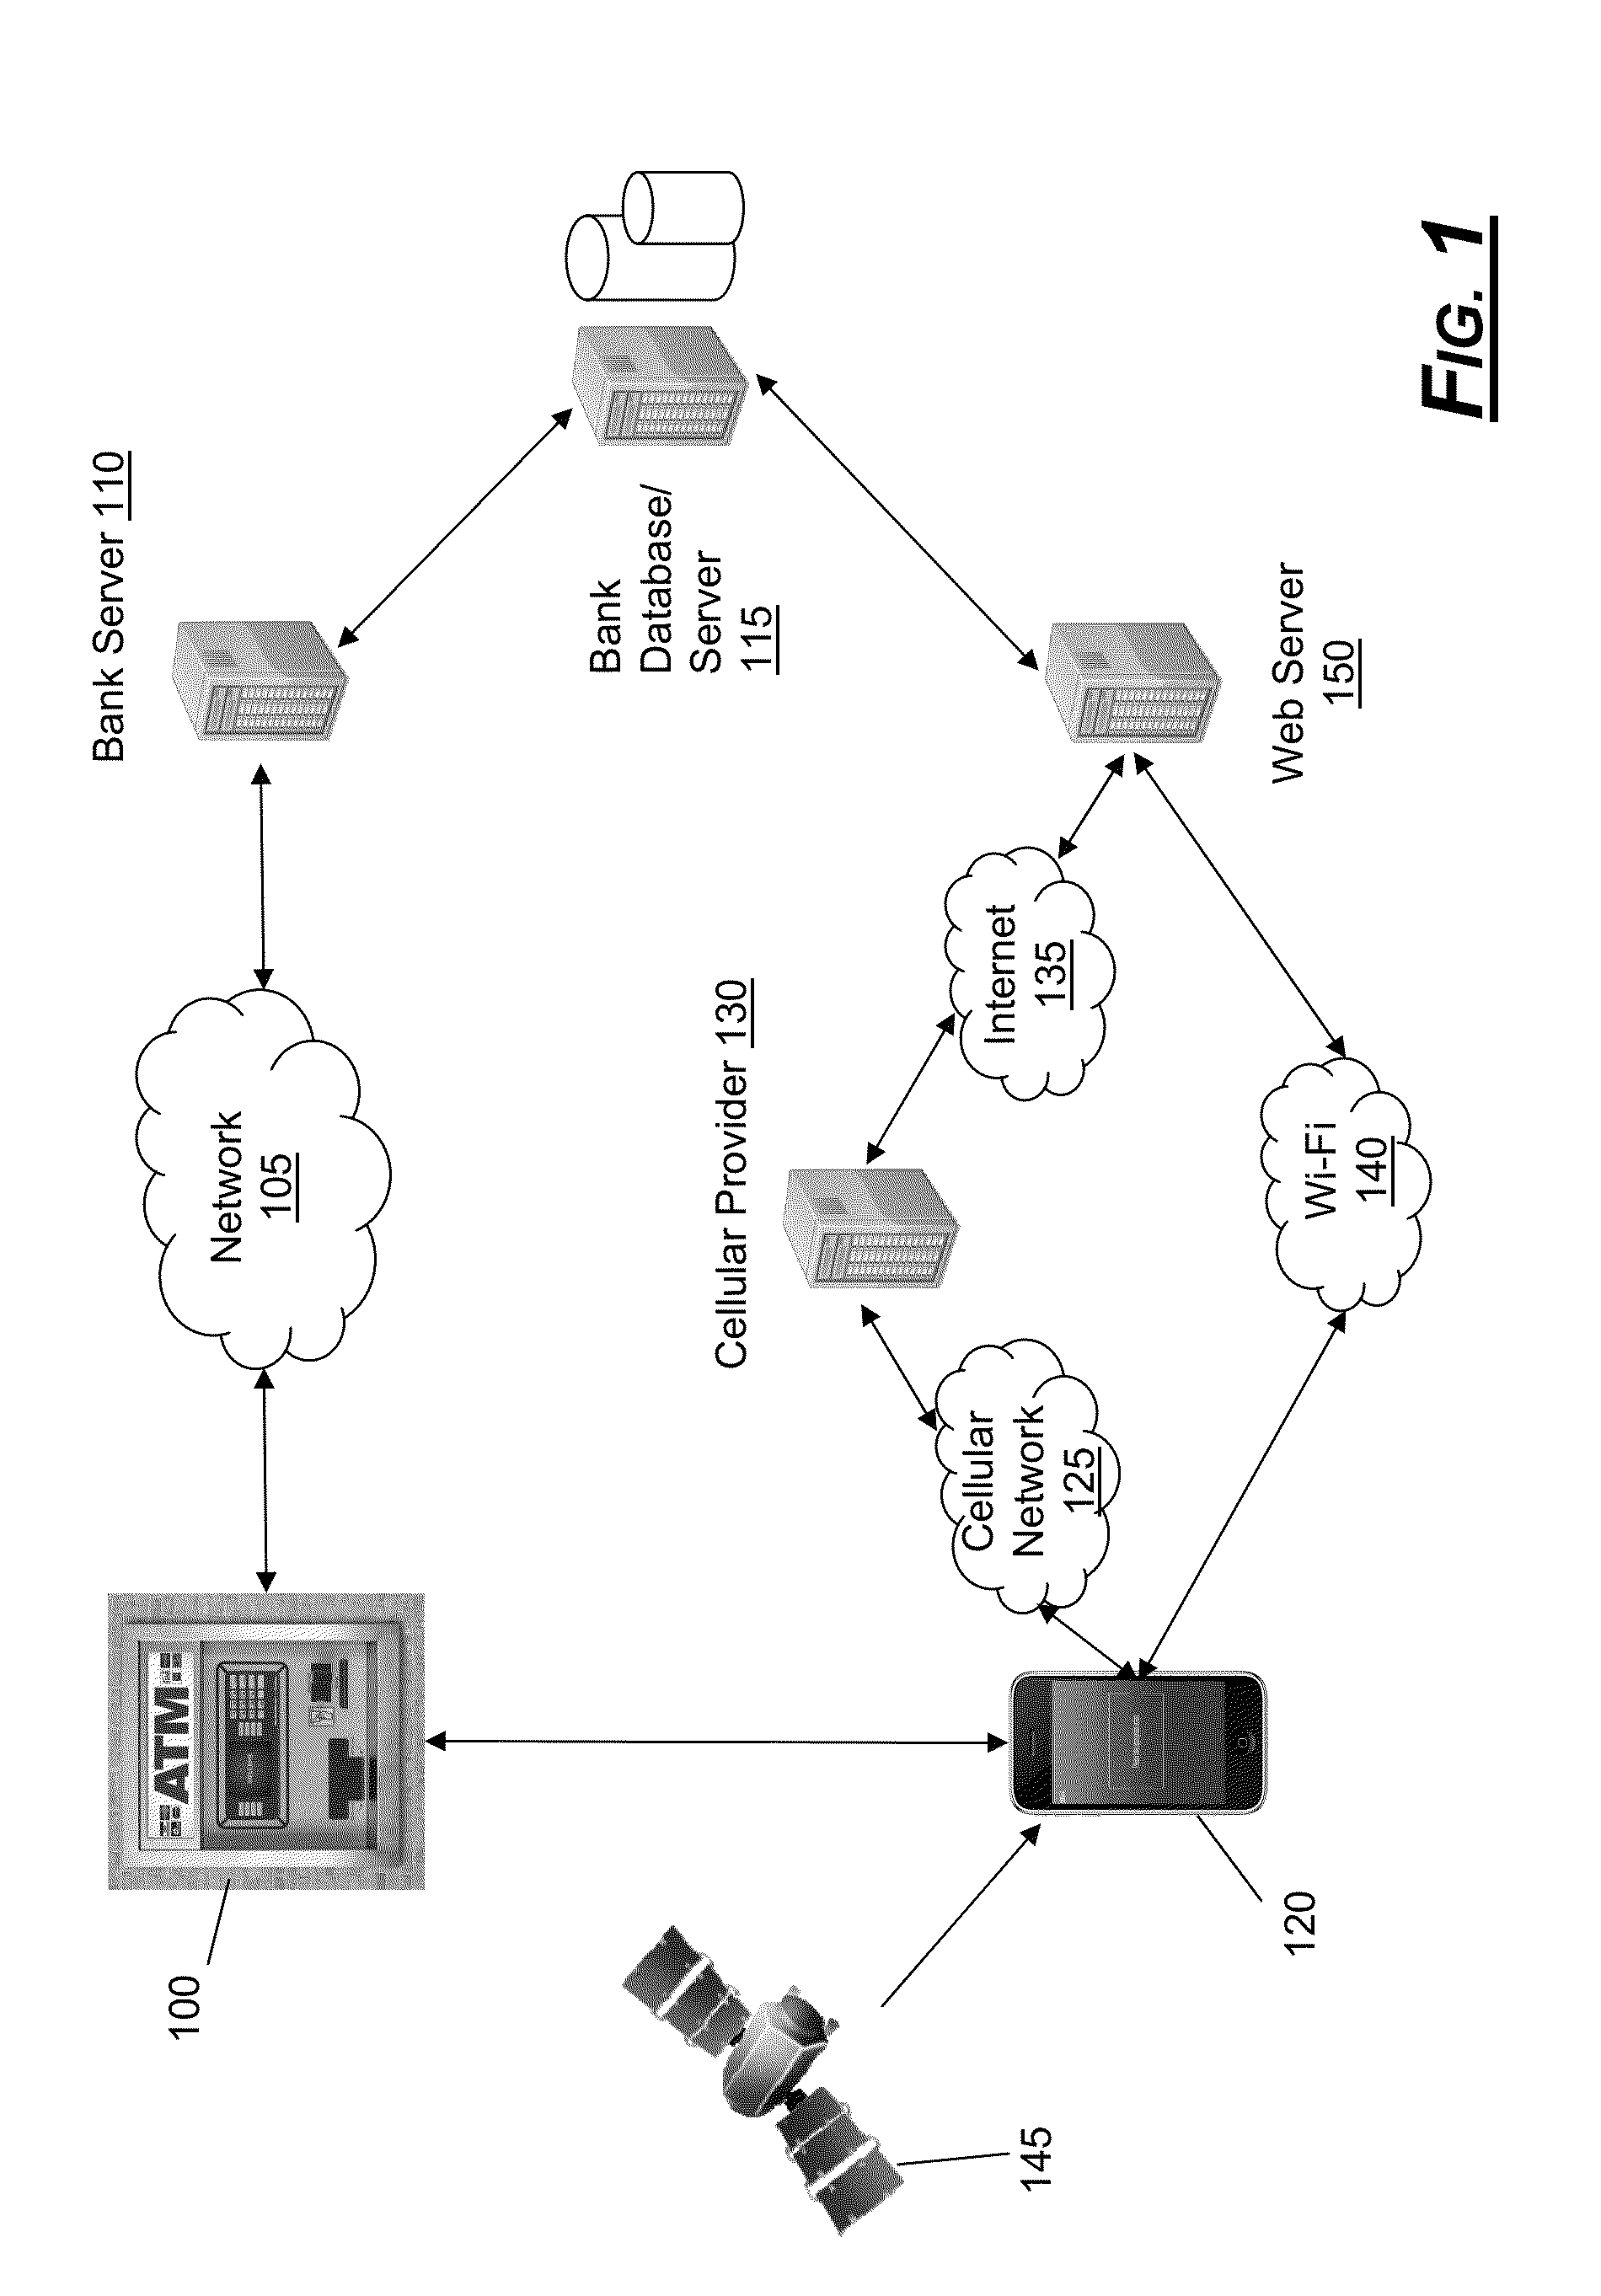 System and method for conducting a transaction at a financial transaction terminal using a mobile device